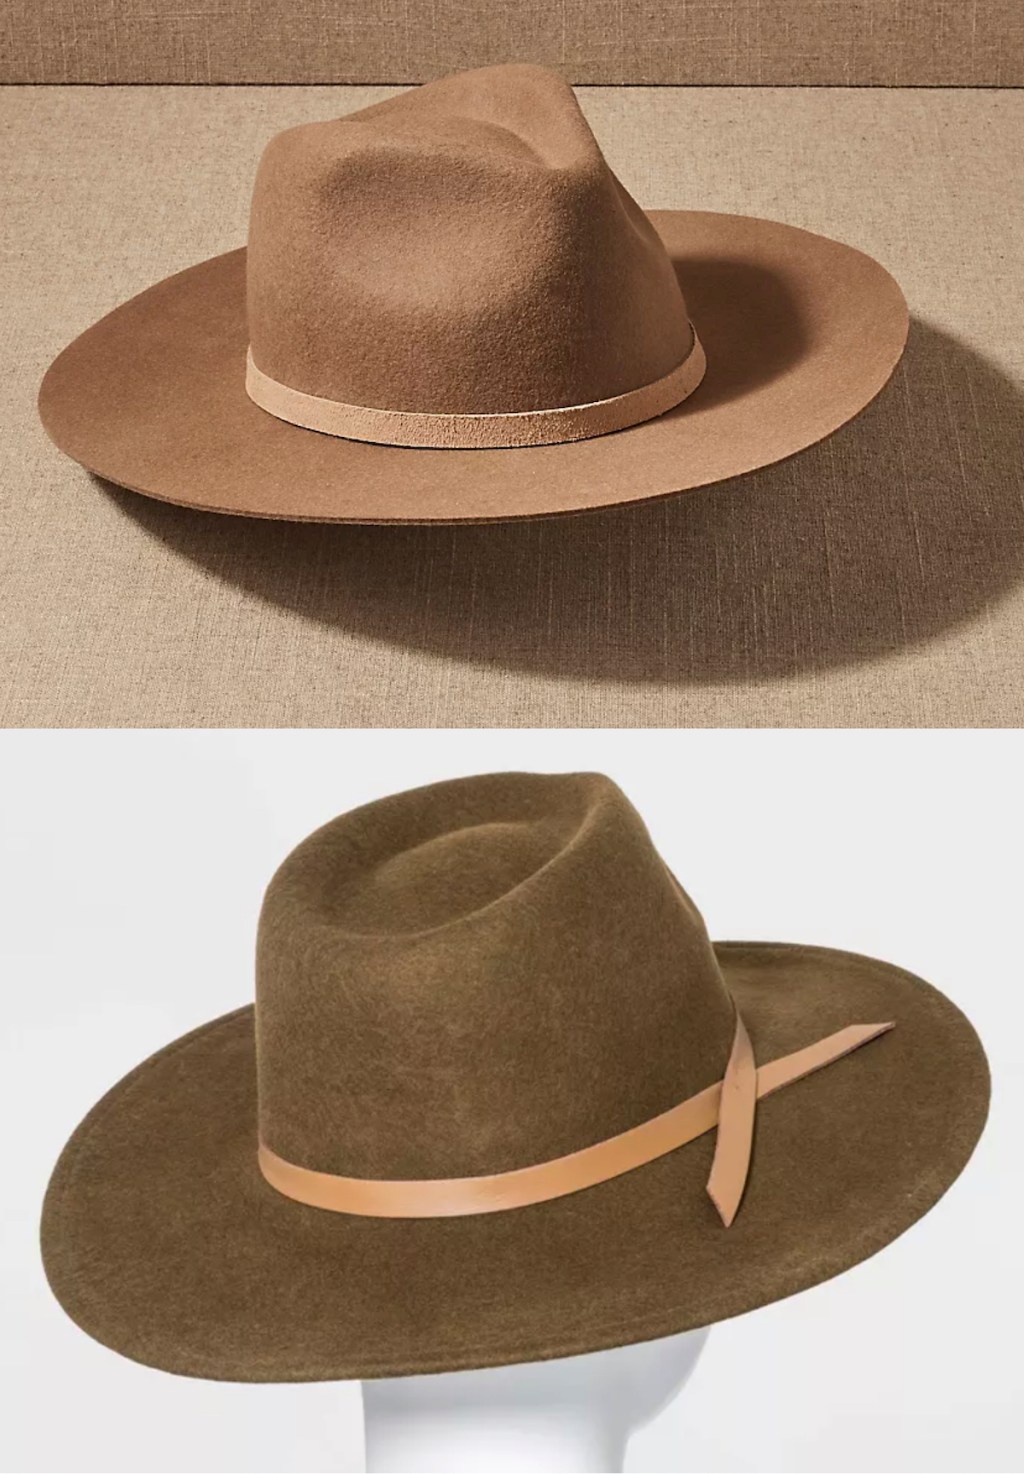 stock photos of two brown and olive colored wide brim hats - anthropologie dupes